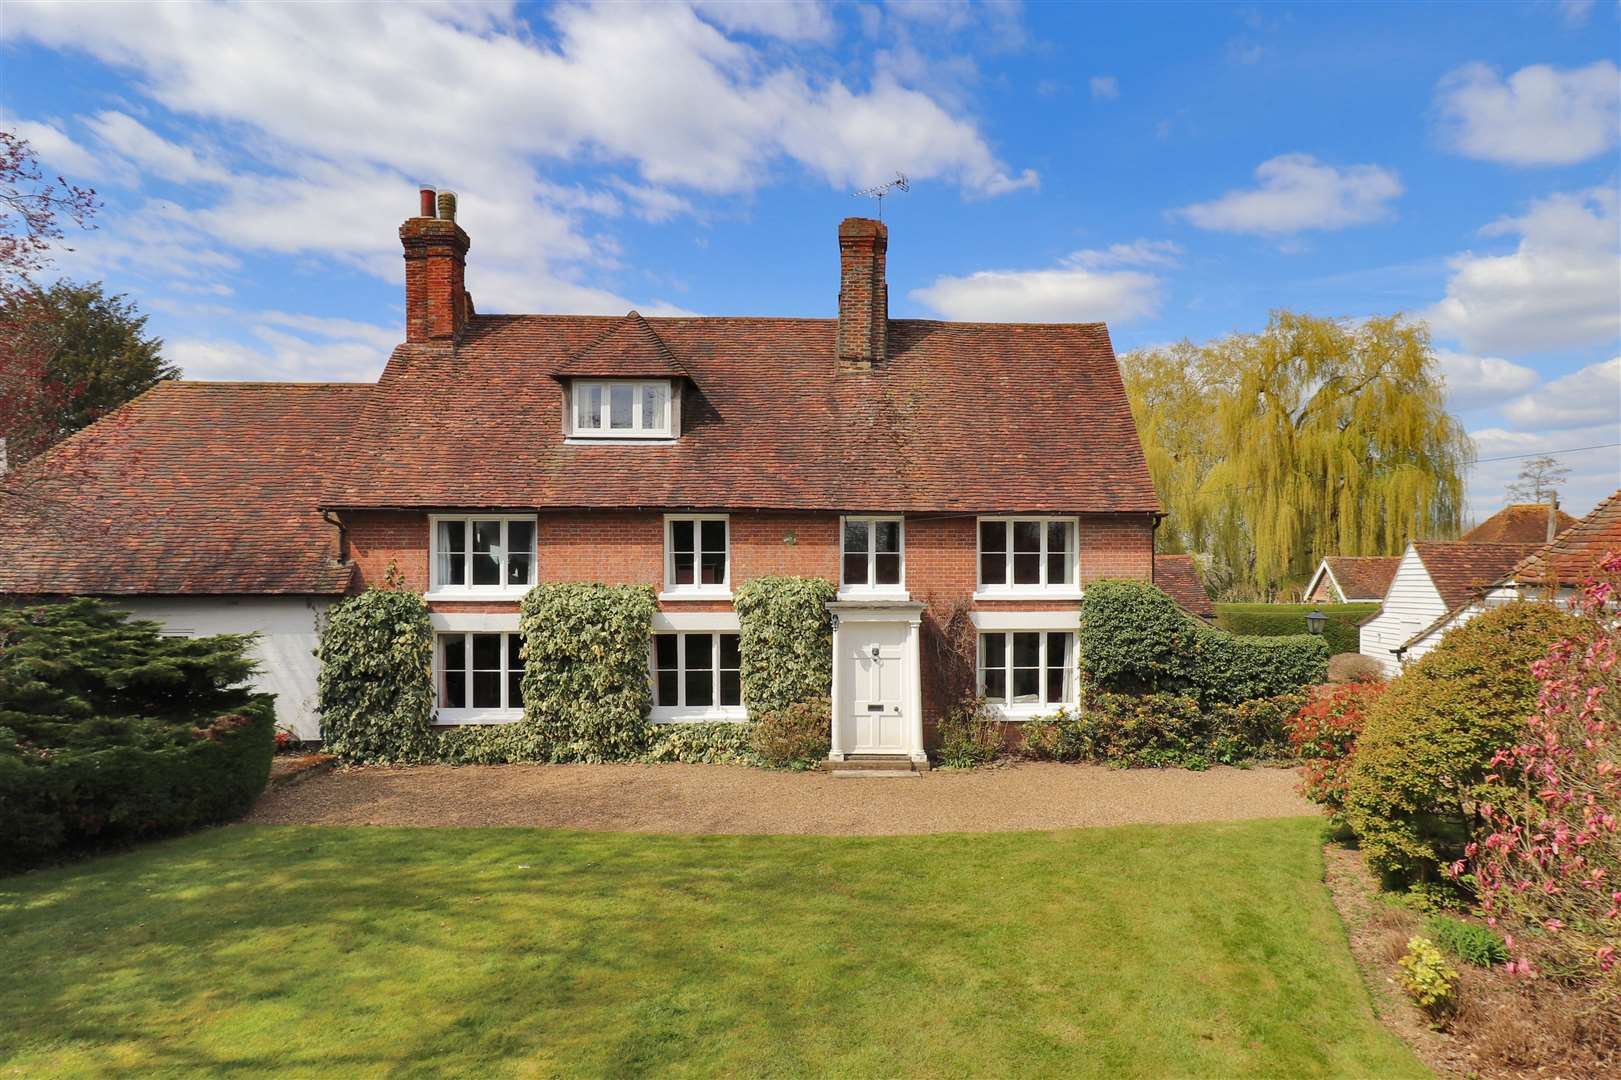 This property in Water Lane, Headcorn is with Jackson-Stops for offers in excess of £1,750,000